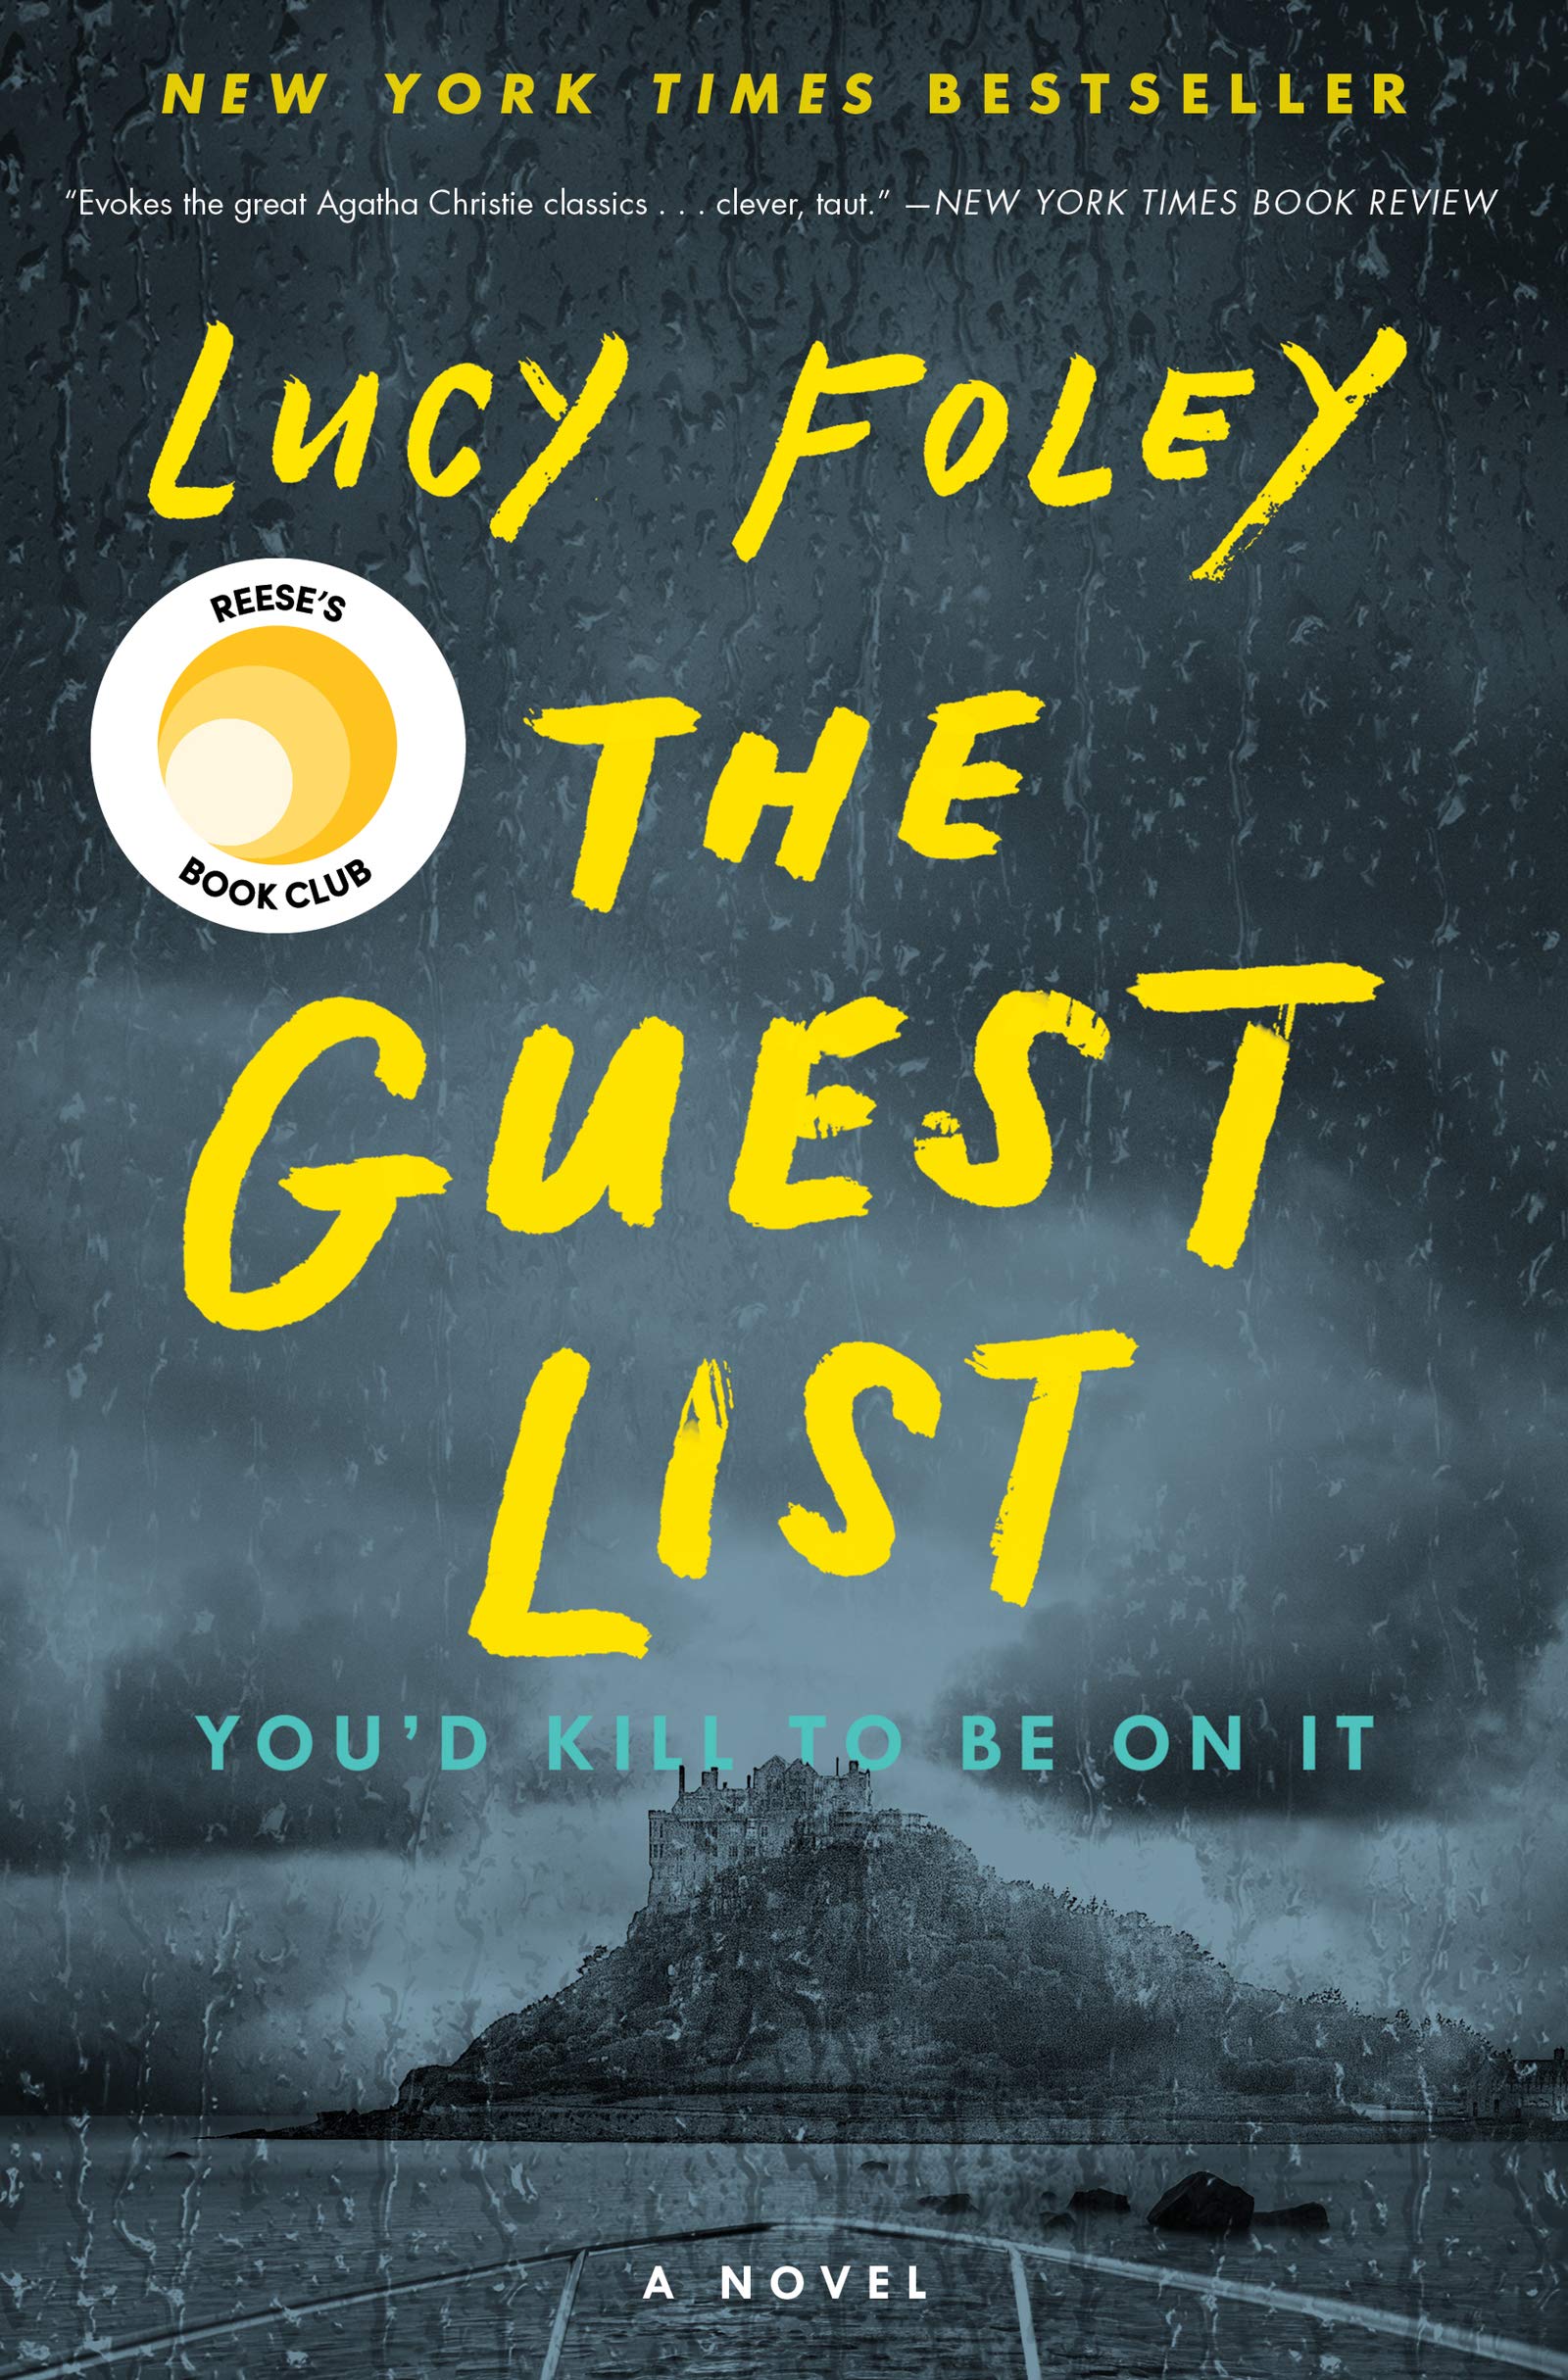 The Guest List by Lucy Foley book cover